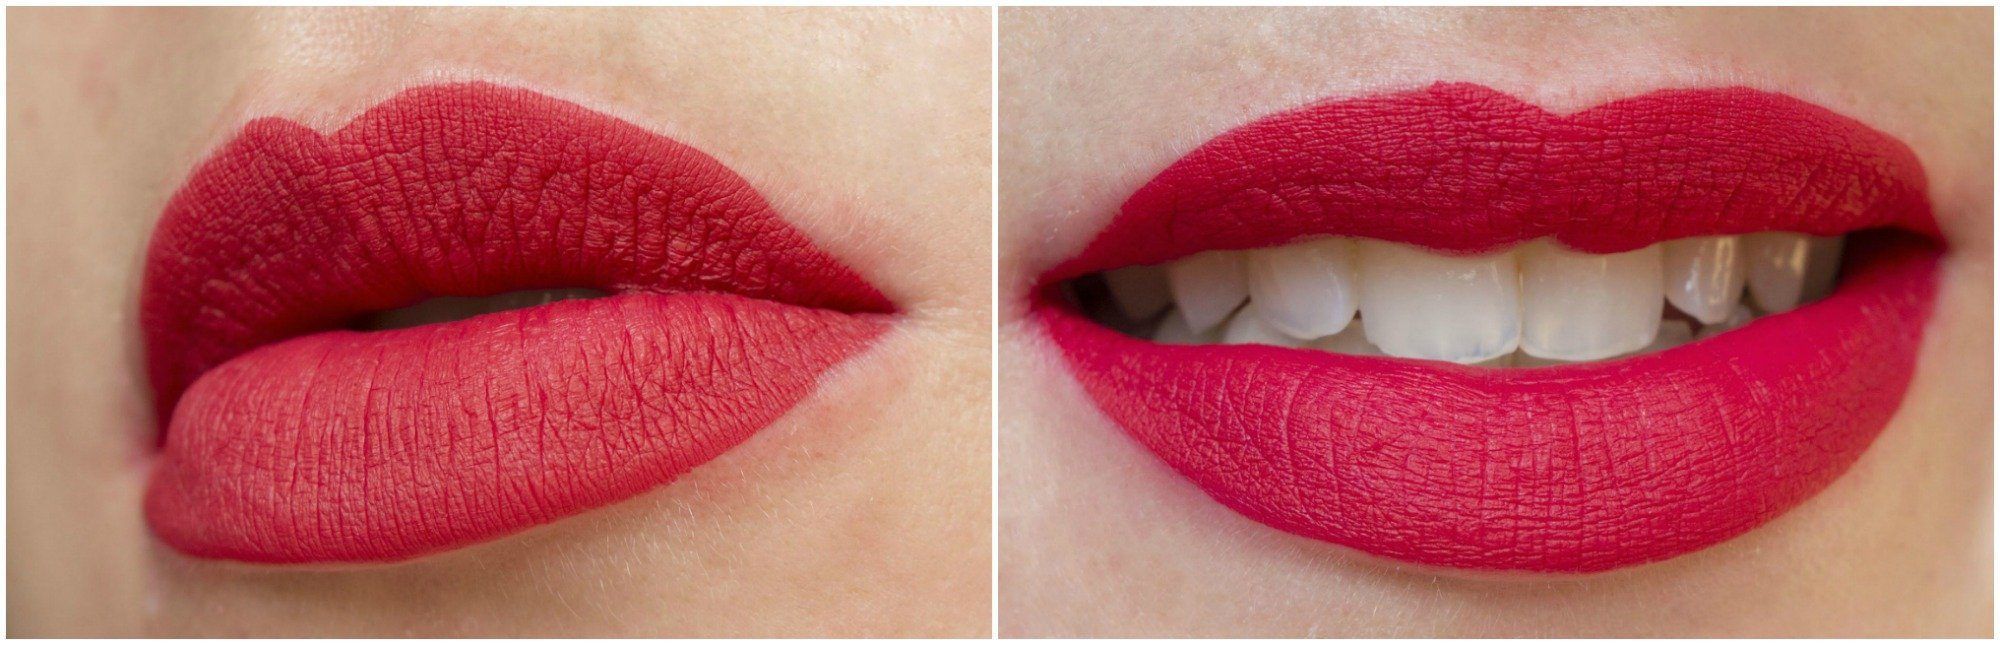 best of A lipstick for red with Boys fetish